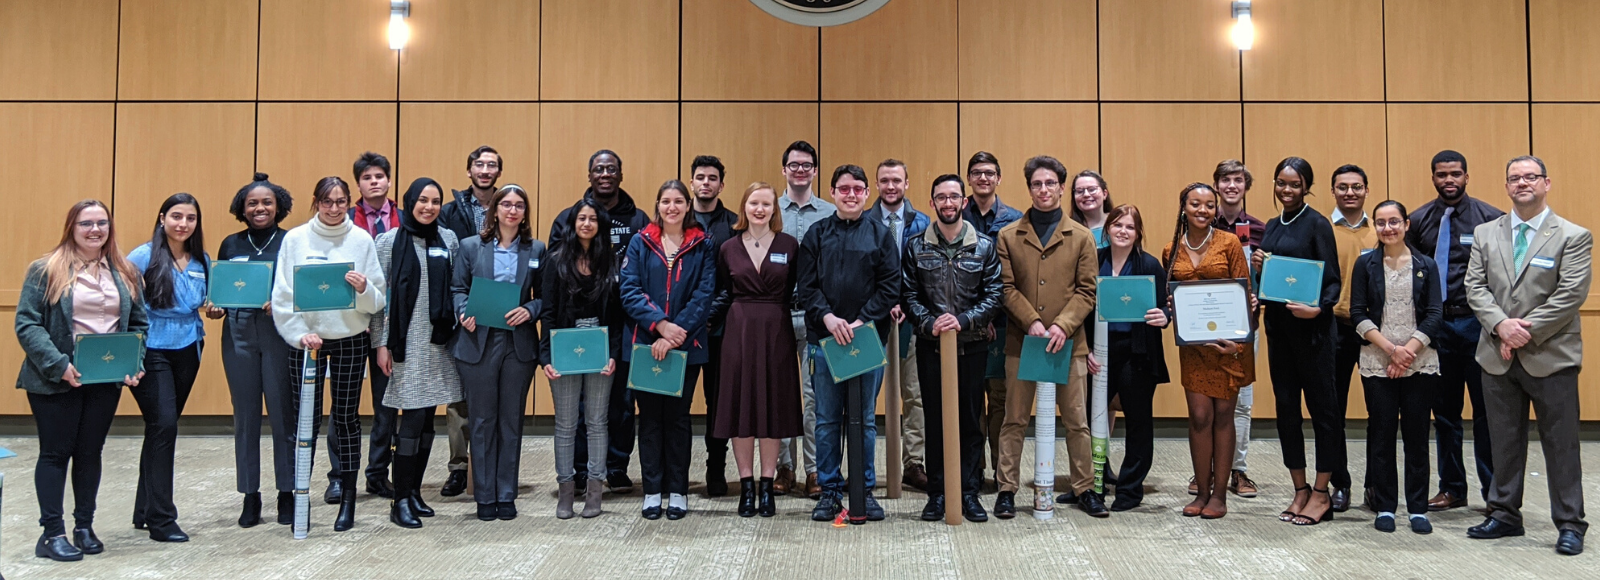 Students pose at the 2020 Undergraduate Research Symposium